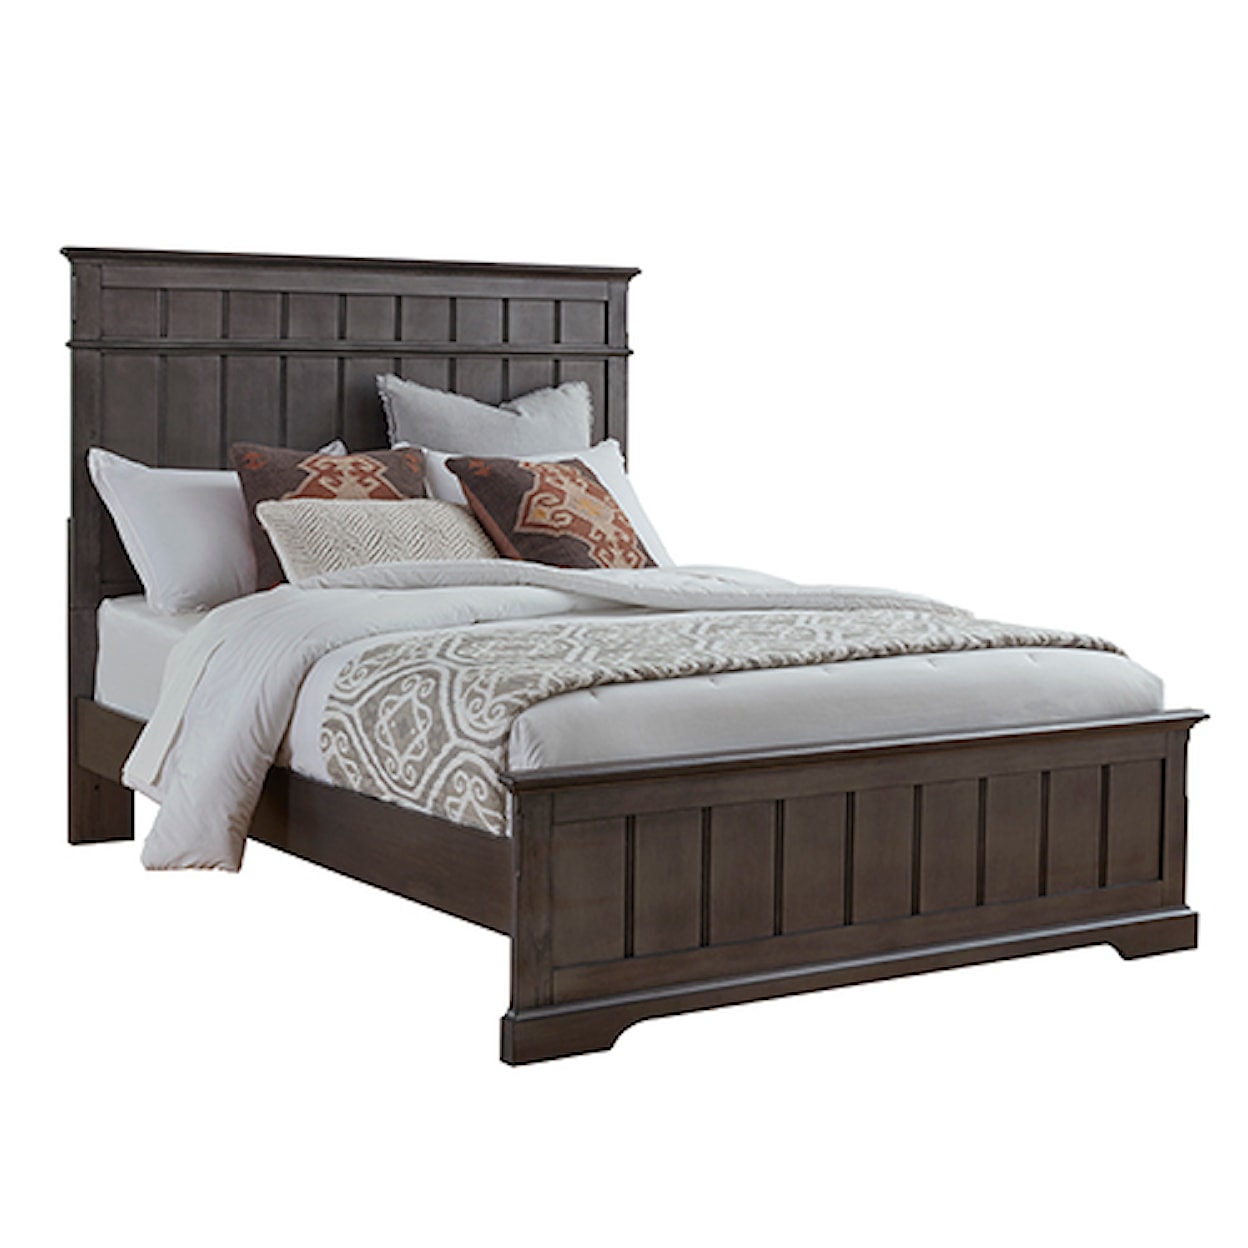 Carolina Chairs Cortland Queen Panel Bed